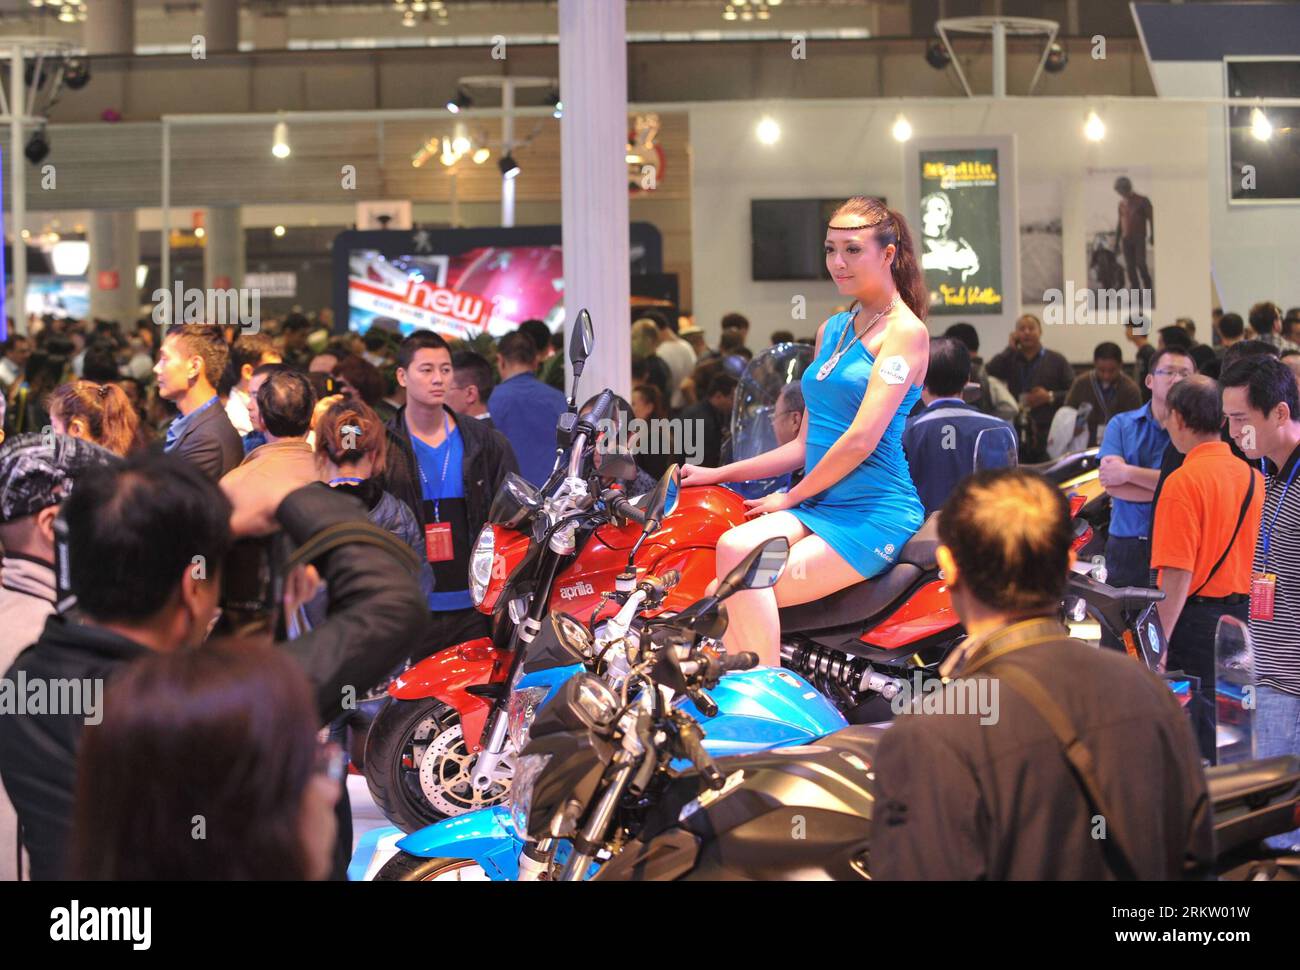 Bildnummer: 58577701  Datum: 11.10.2012  Copyright: imago/Xinhua (121011) -- CHONGQING, Oct. 11, 2012 (Xinhua) -- A model sits on a motorcycle exhibited in the 11th China International Motorcycle Trade Exhibition in southwest China s Chongqing Municipality, Oct. 11, 2012. More than 400 motorcycle companies from 10 countries and regions attended the four-day expo kicked off on Thursday. About 100 international traders also participated in the fair, and the purchase sum is expected to exceed 100 million U.S. dollars. (Xinhua/Liu Chan) (hy) CHINA-CHONGQING-MOTOR CYCLE EXPO-OPENING (CN) PUBLICATIO Stock Photo